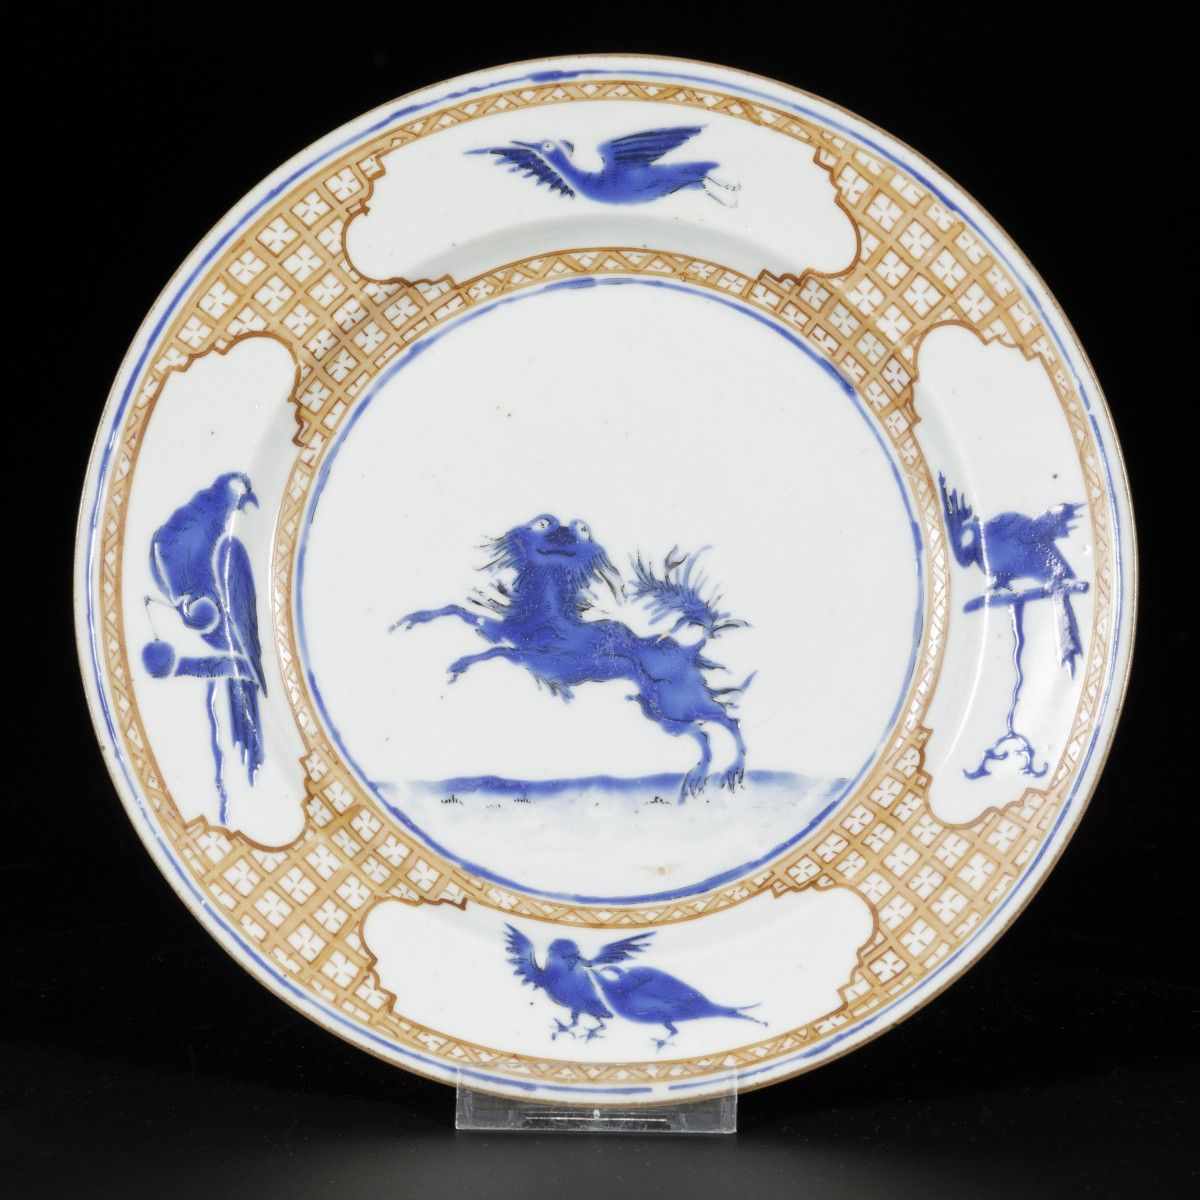 A porcelain plate "The Leaping Pekinese", based on a design by Cornelis Pronk, C&hellip;